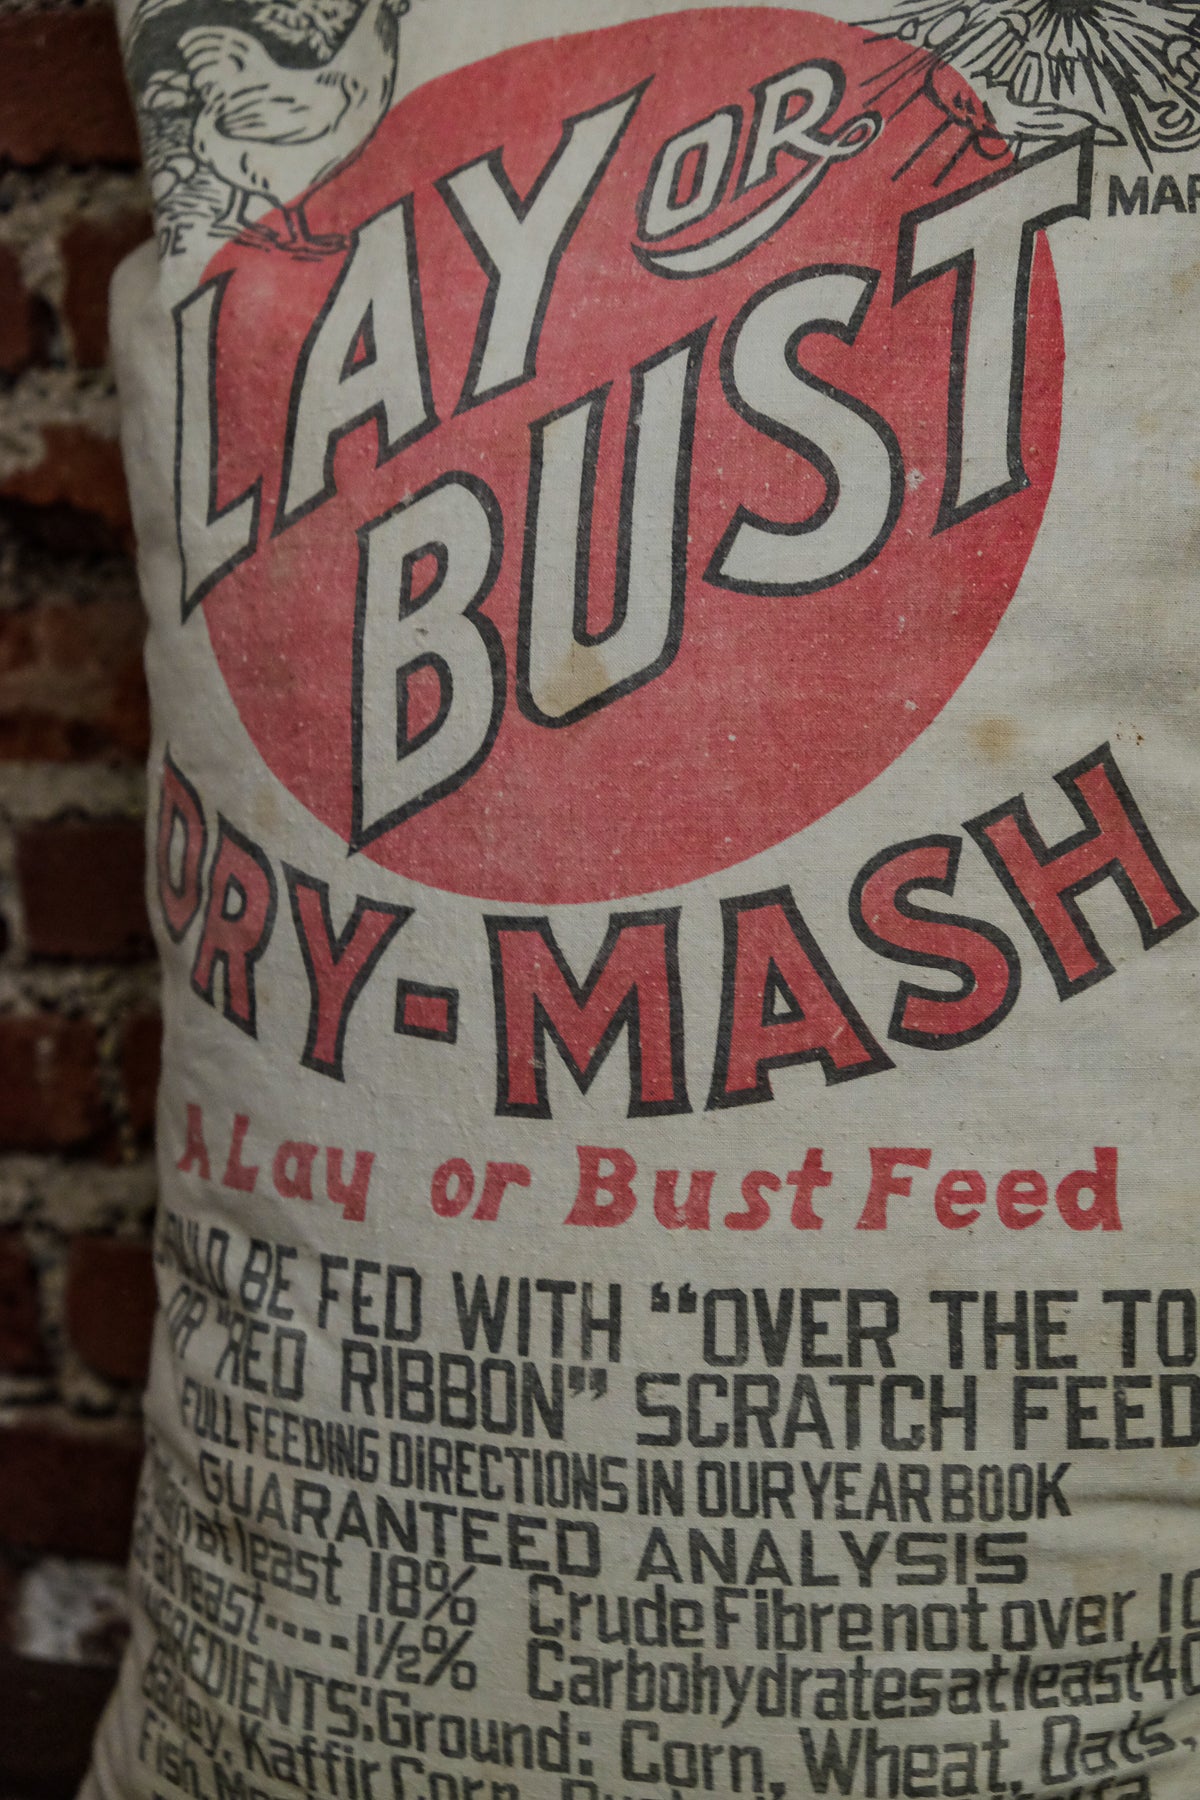 Vintage "Lay or Bust" Poultry Feed Sack - Park&Pollard Co. Boston